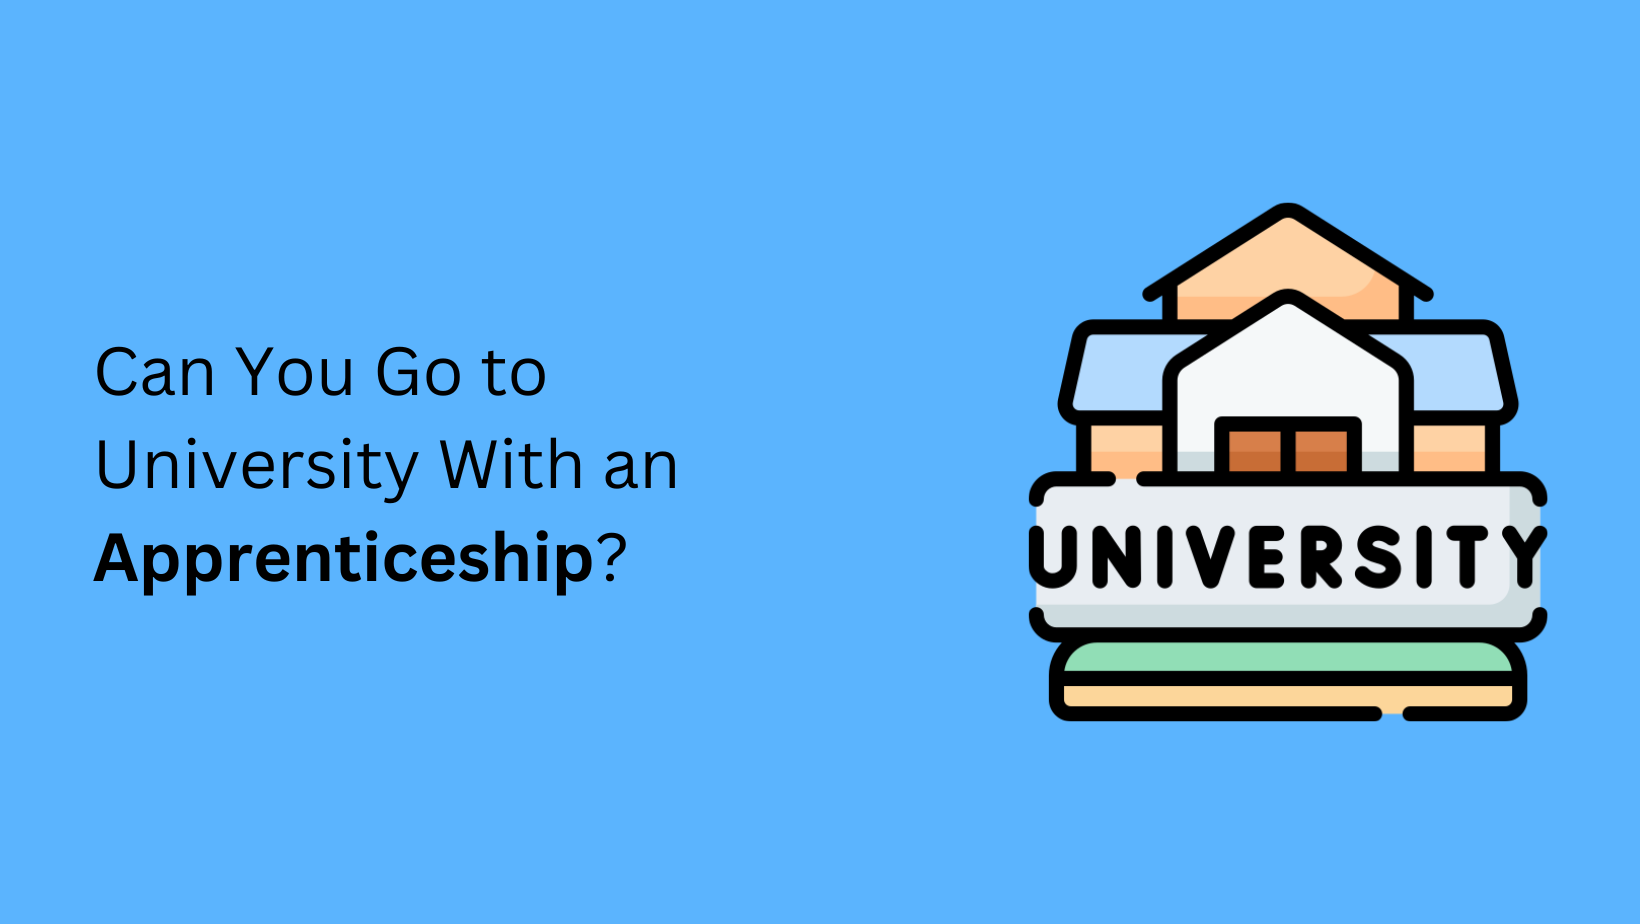 Can You Go to University With an Apprenticeship